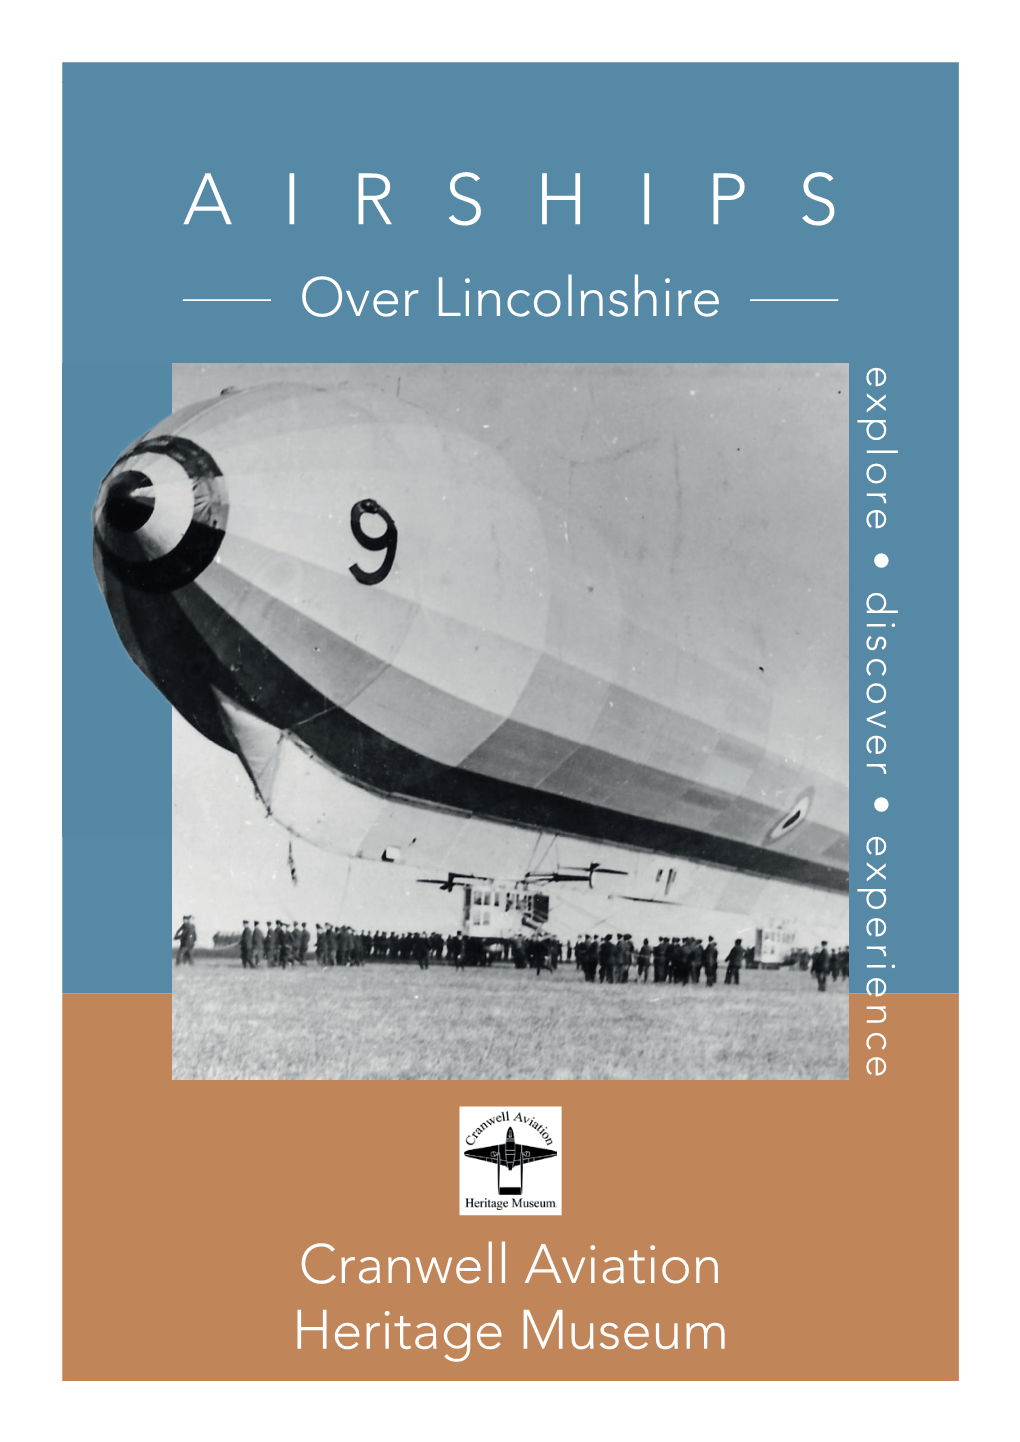 Airships Over Lincolnshire